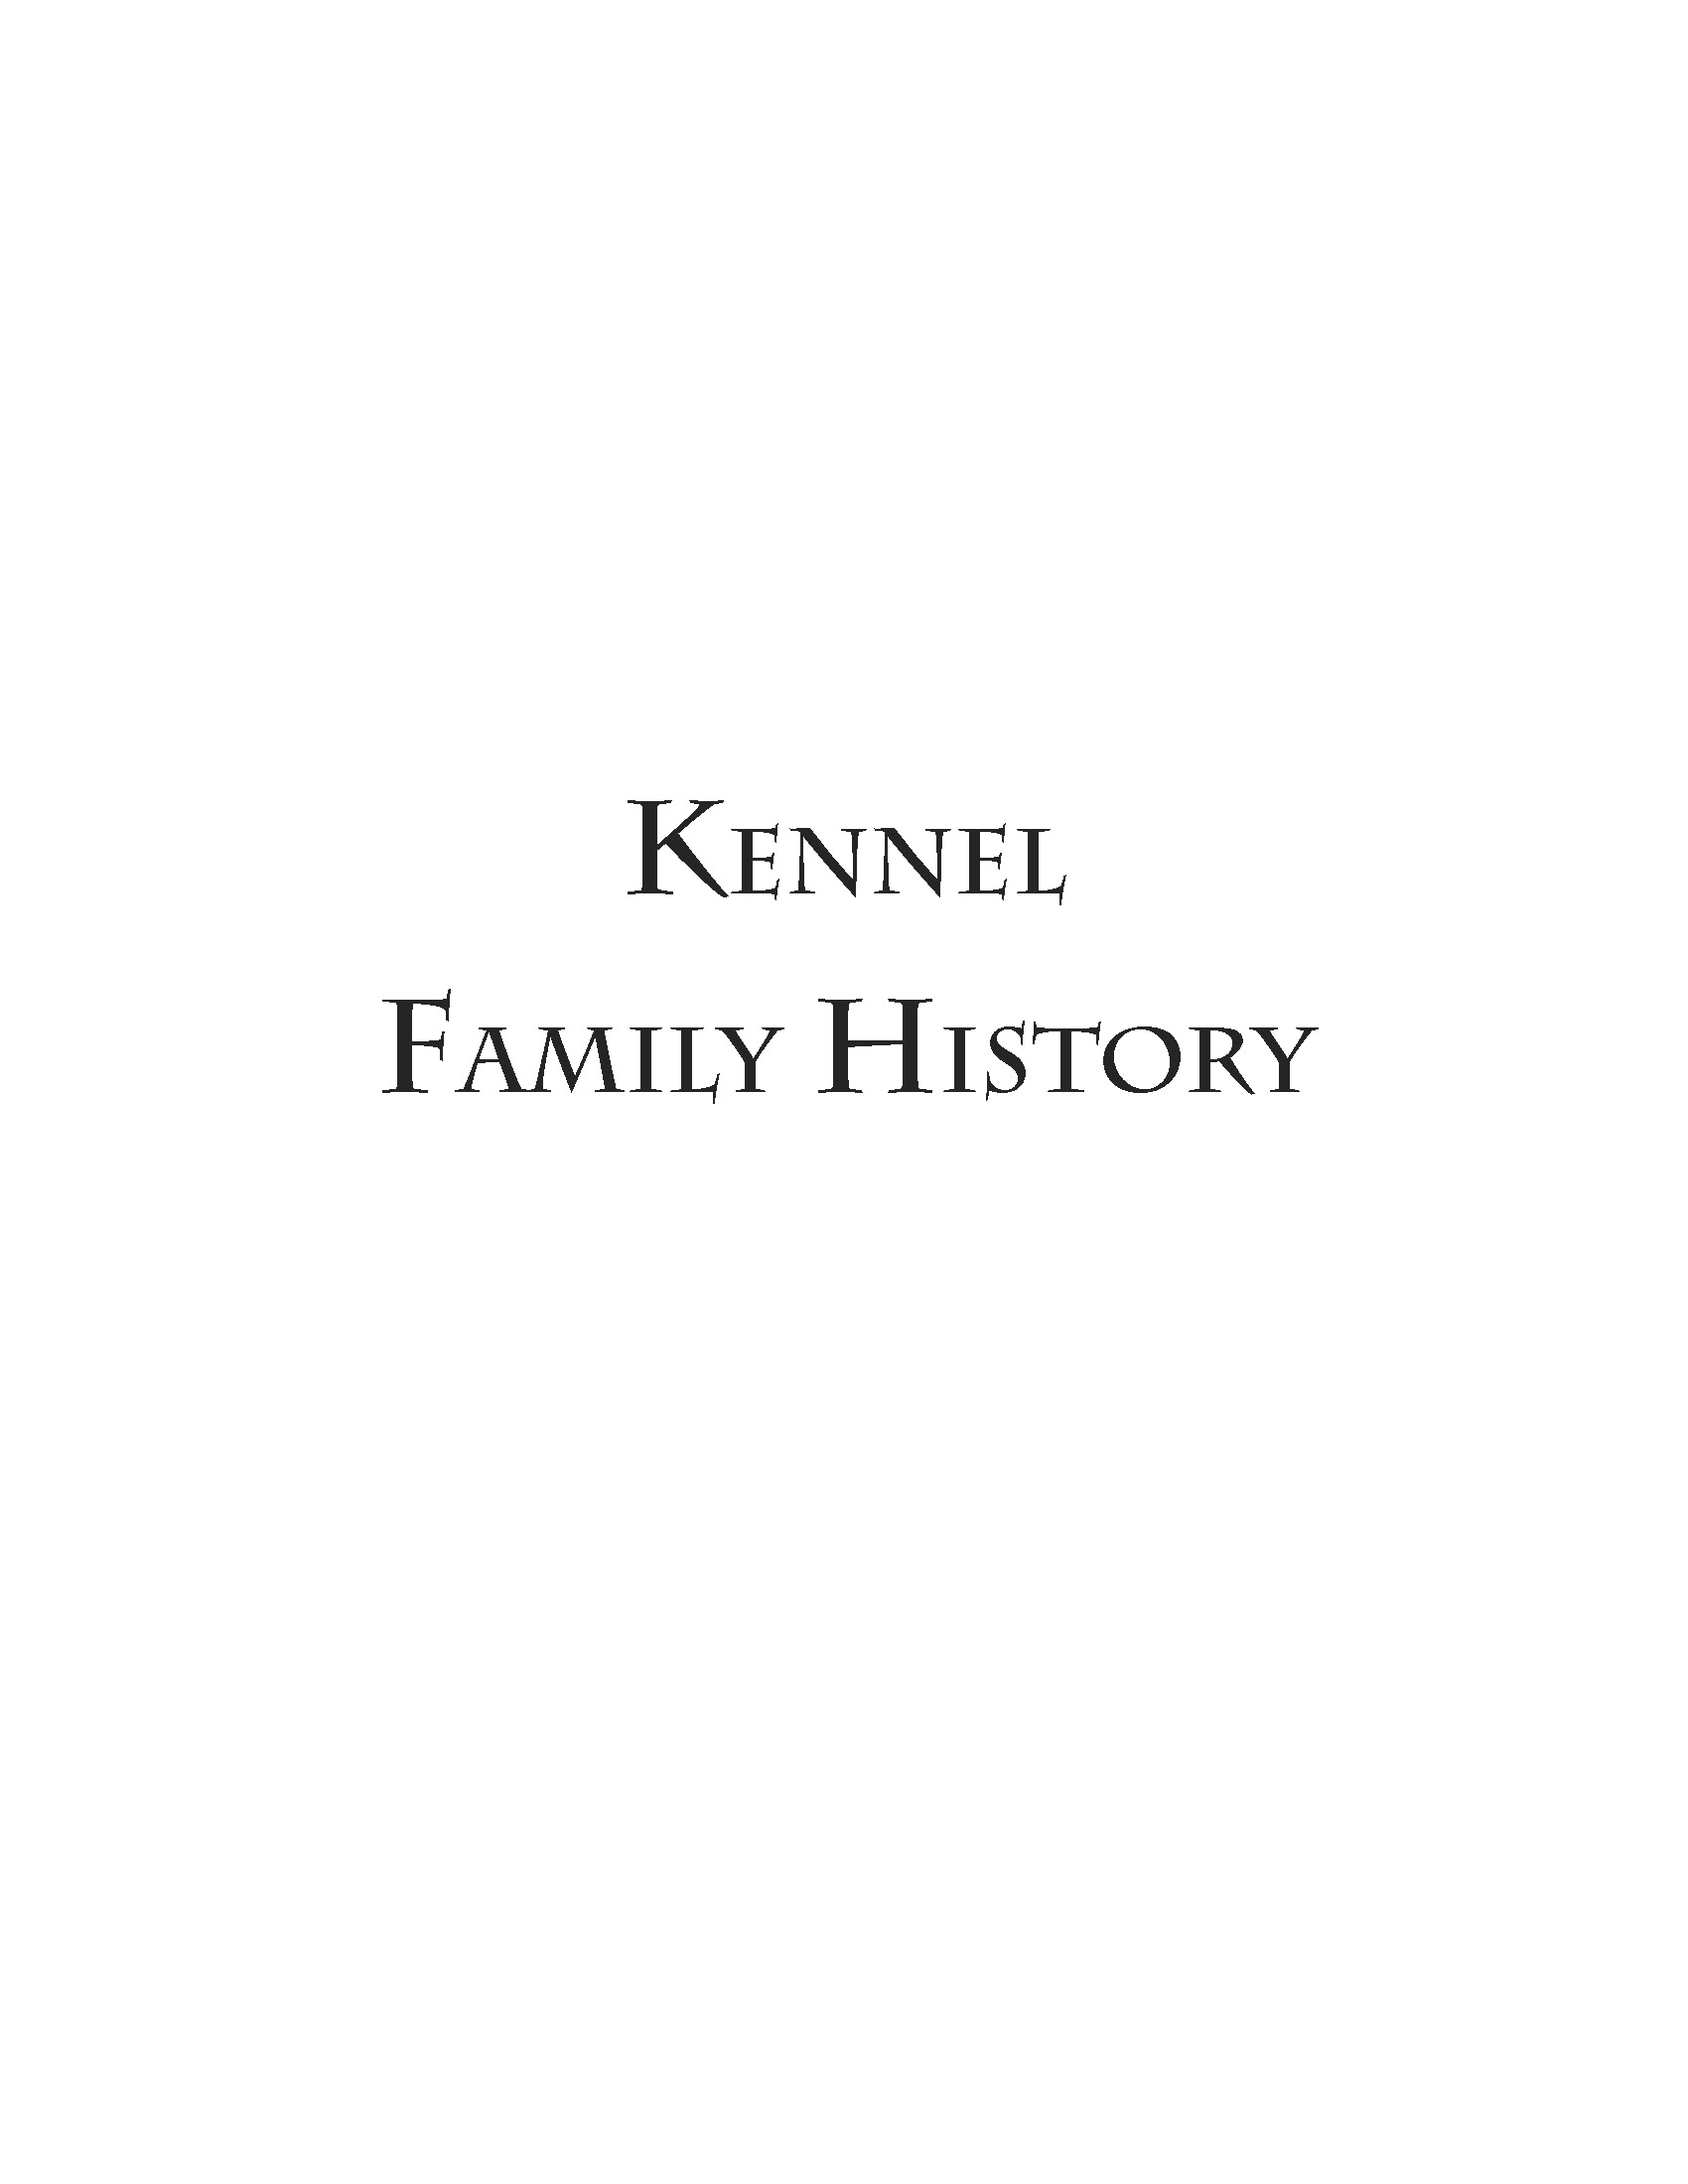 2017_Kennel Family History Sample Edit_Page_01.jpg